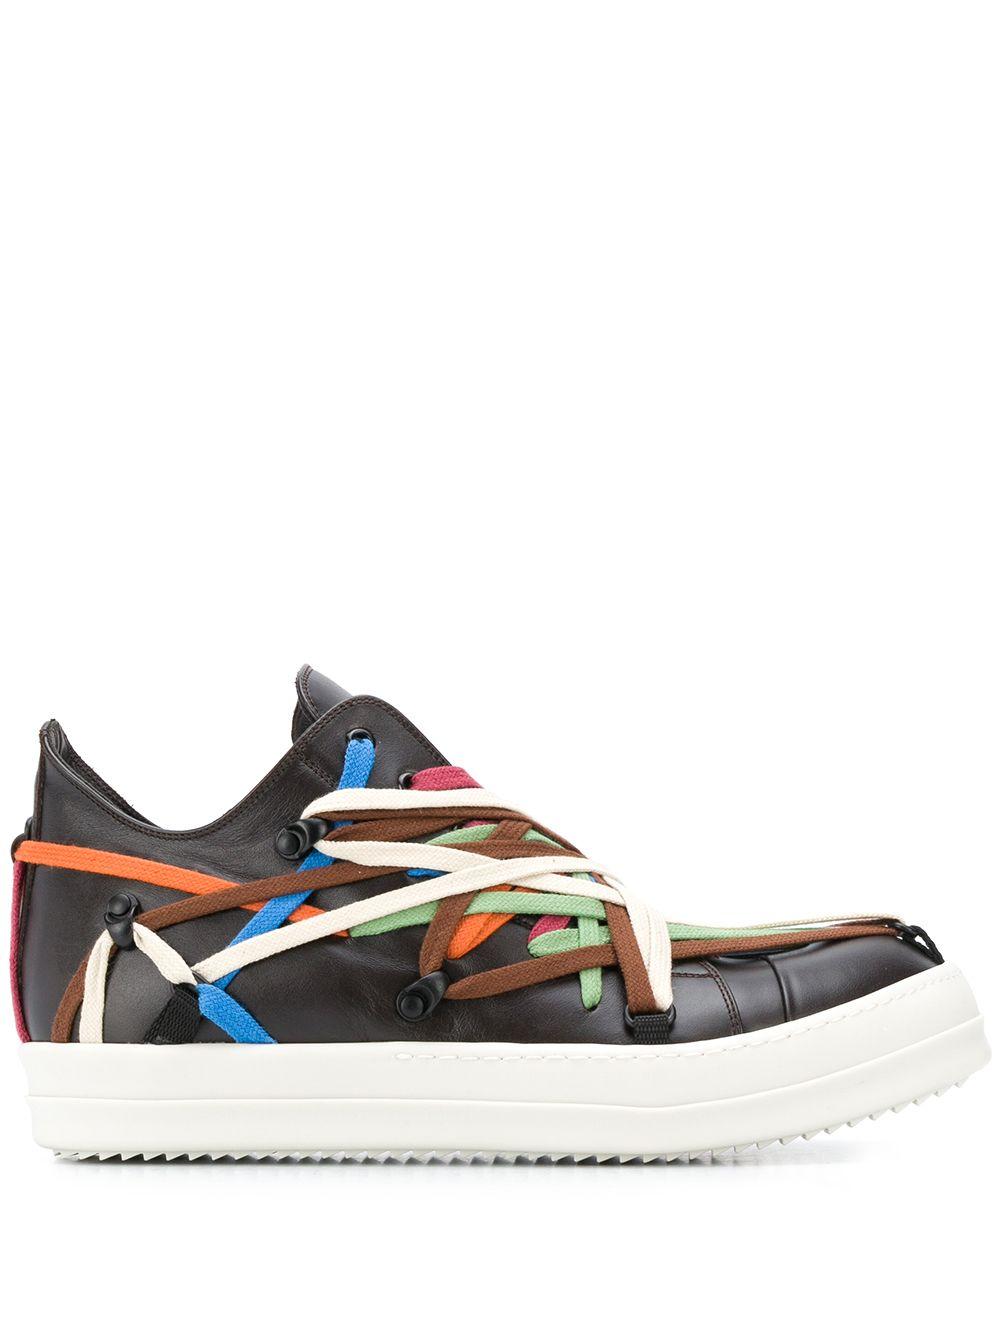 Rick Owens Multi-coloured Lace Sneakers in Brown for Men - Lyst